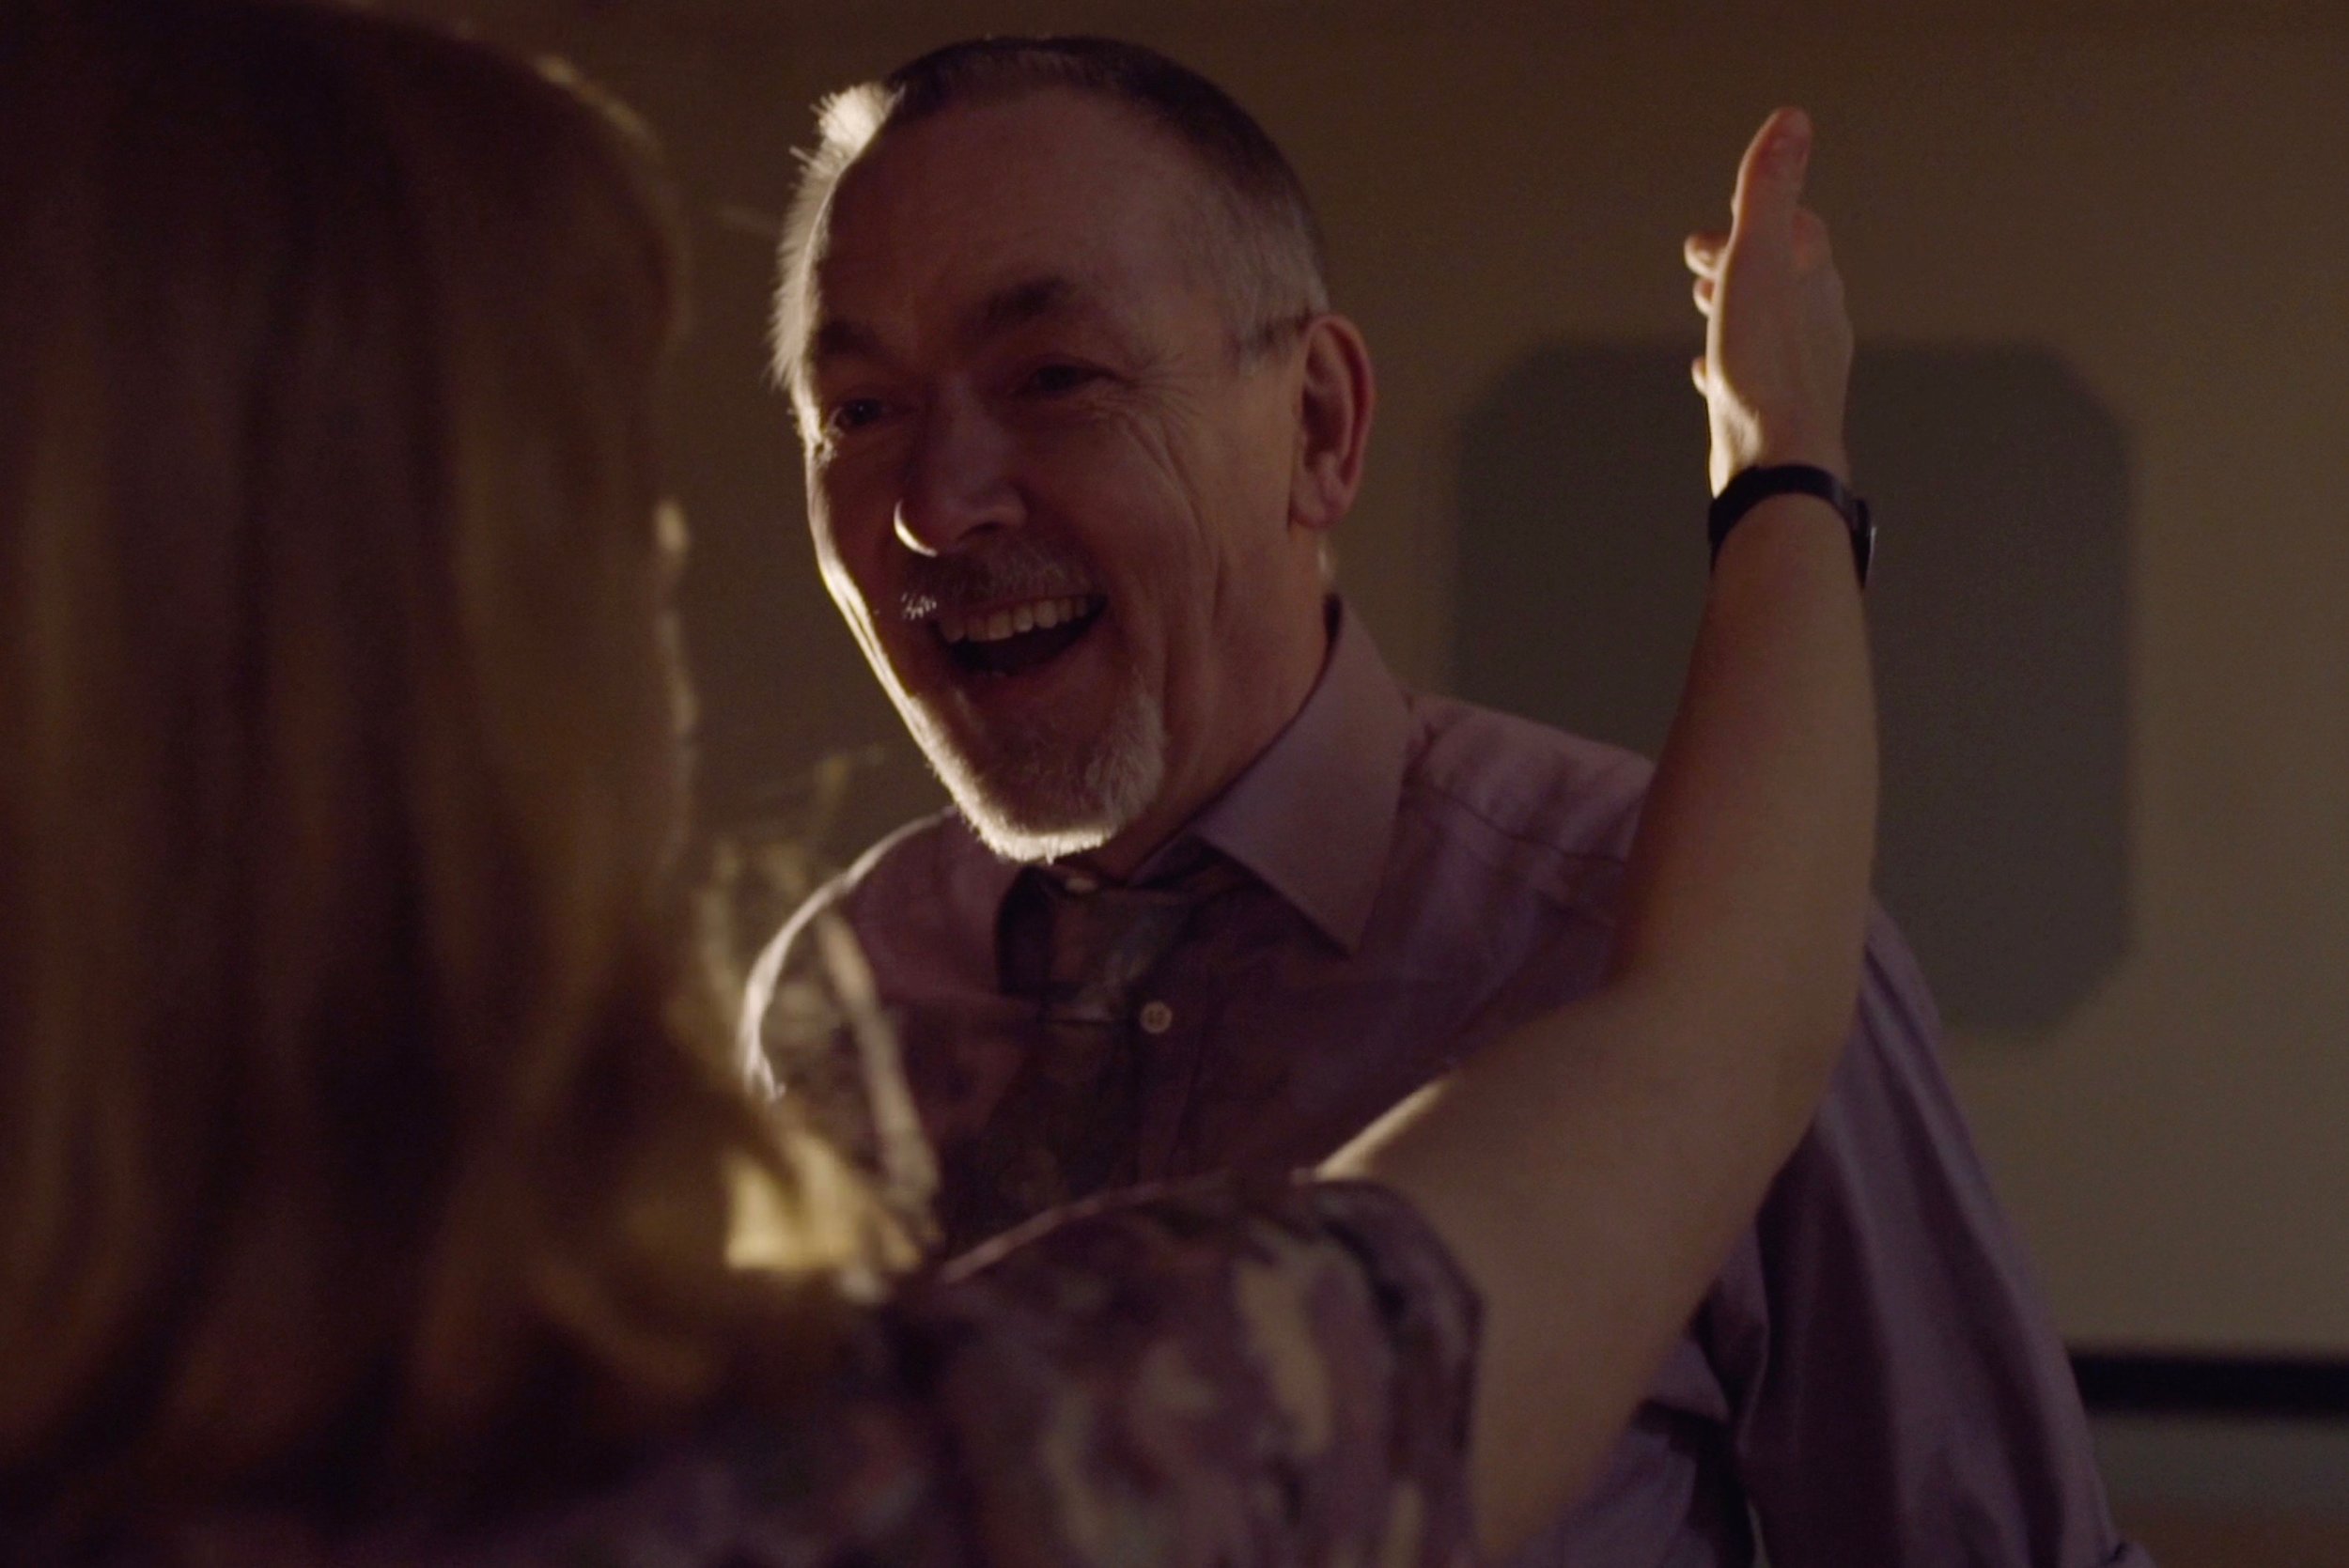 Dancing with My Dad - Image by Alex Ayre - Still 001.jpeg